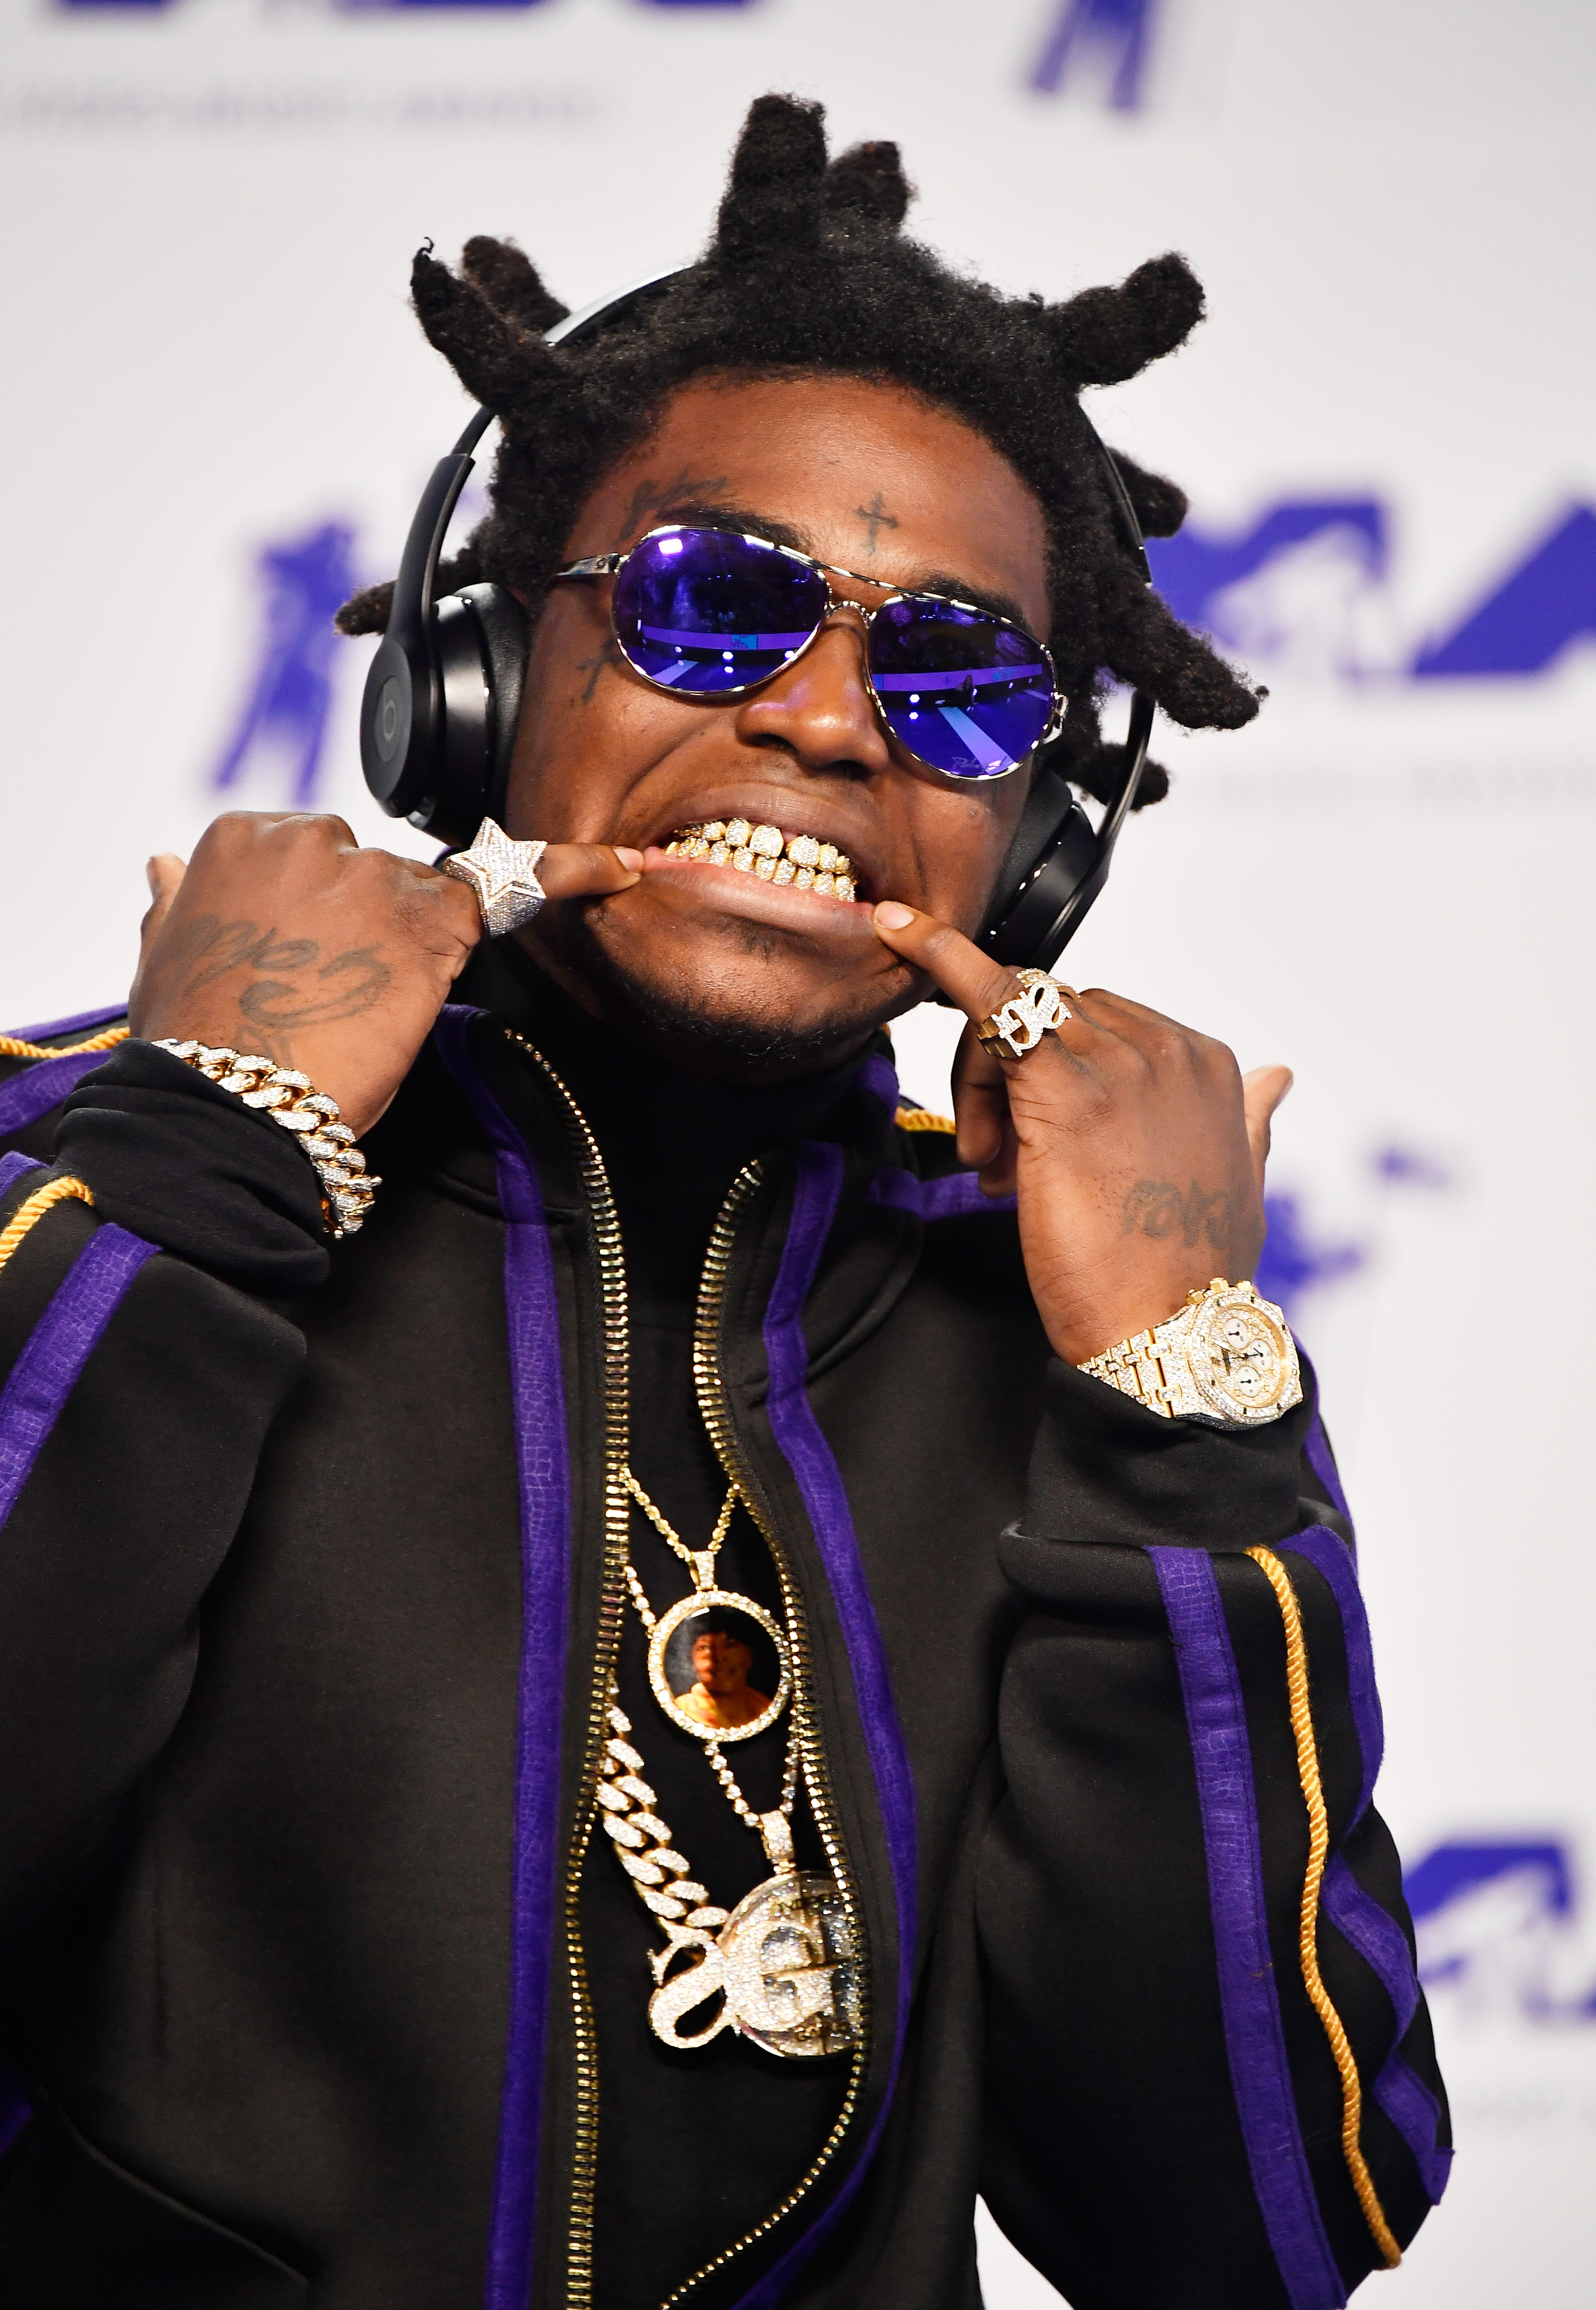 Kodak Black Gets His Attorney S Name Tattooed On His Hand Following Prison Release The Shade Room